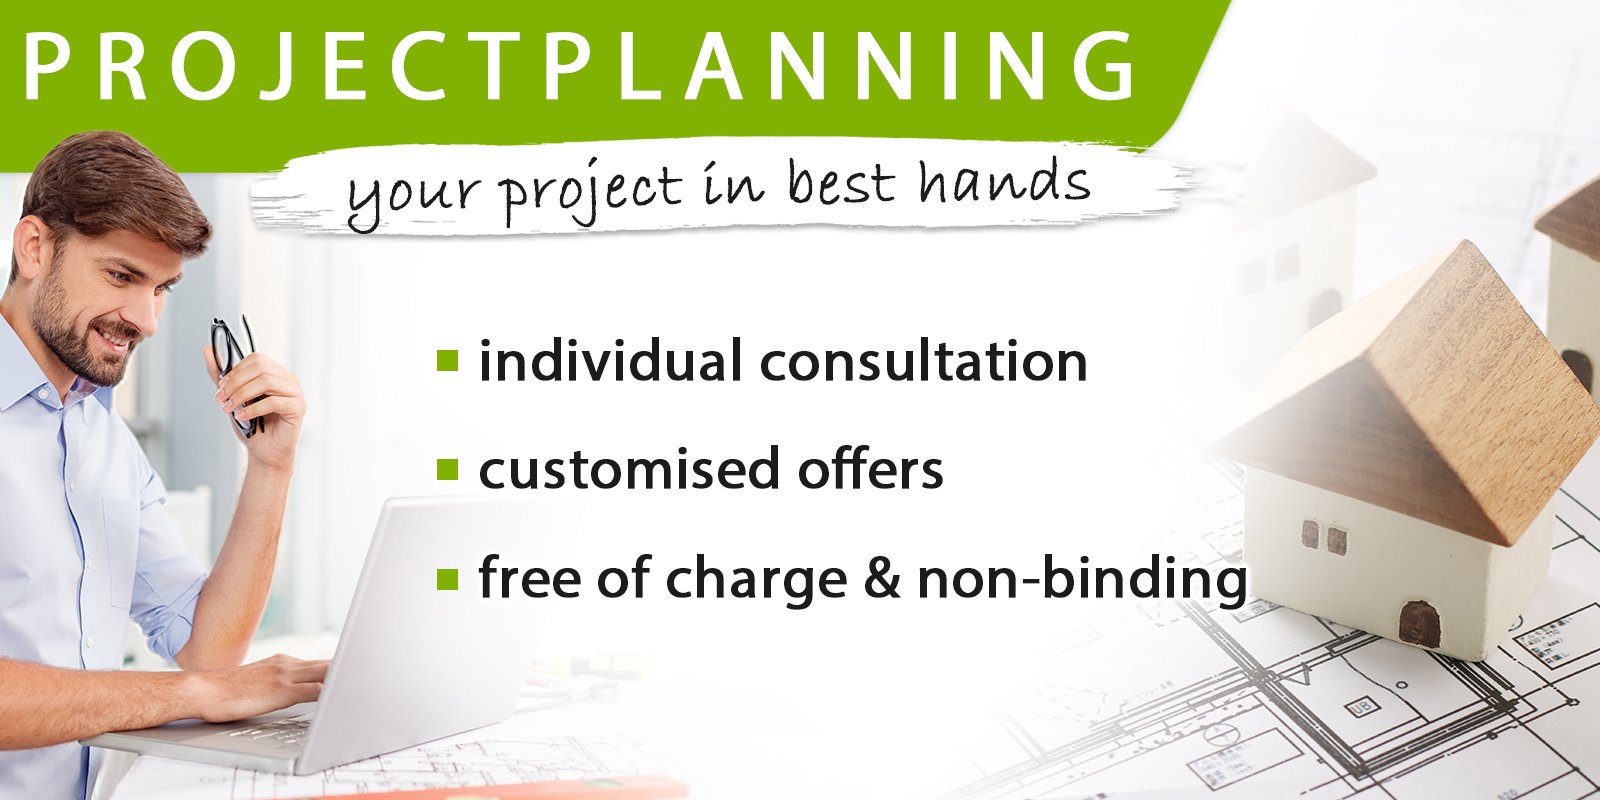 We support you in the planning of your project!